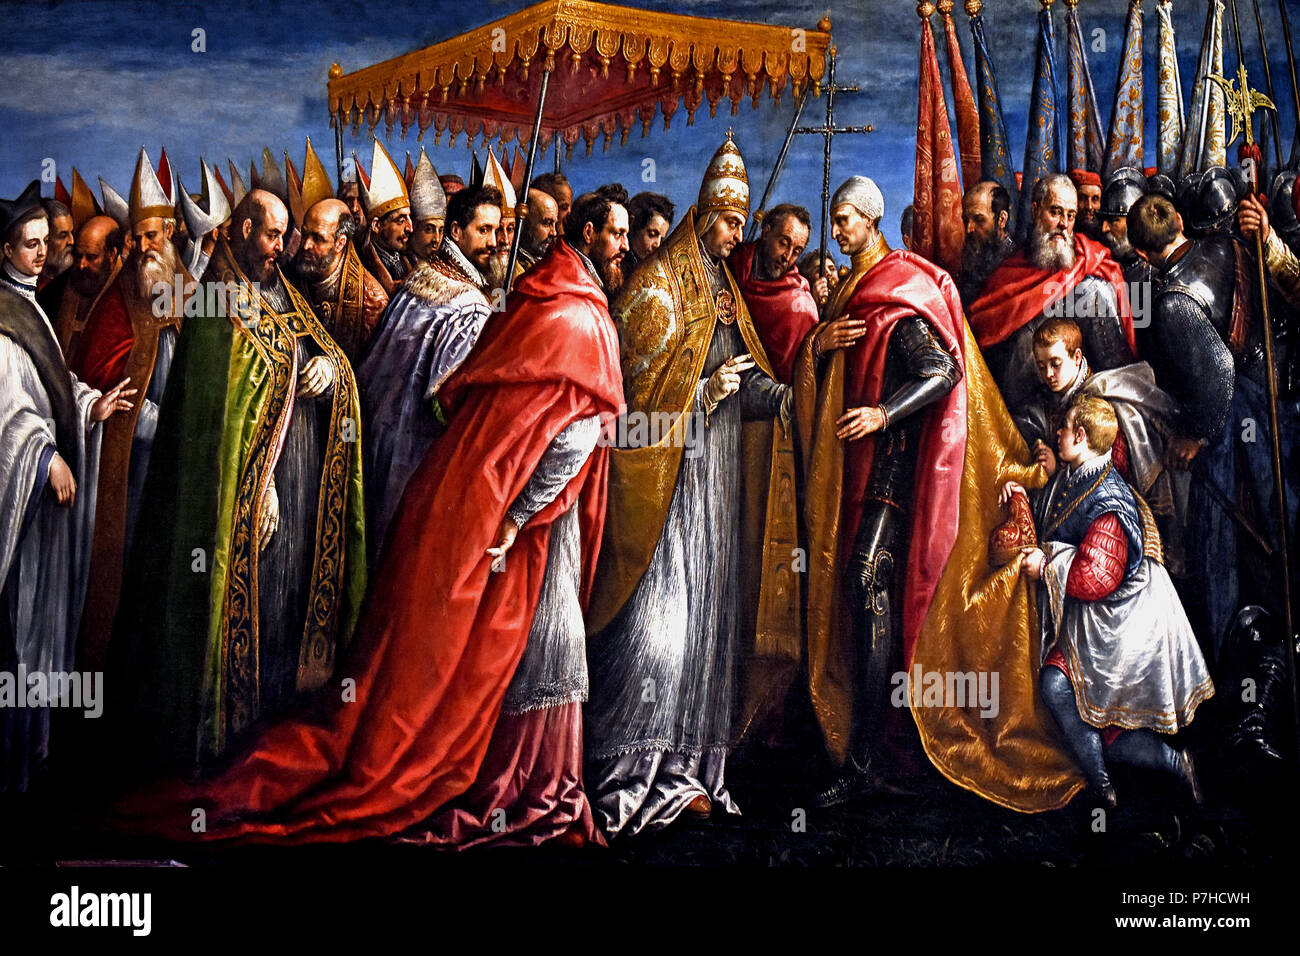 Pope Alexander III meets the Doge Sebastiano Ziani after the Battle of Salvore 1590-1594 Jacopo Bassano (1510 - 1592 Jacopo dal Ponte), The Doge's Palace ( Palazzo Ducale ) Venice, Italy. Stock Photo